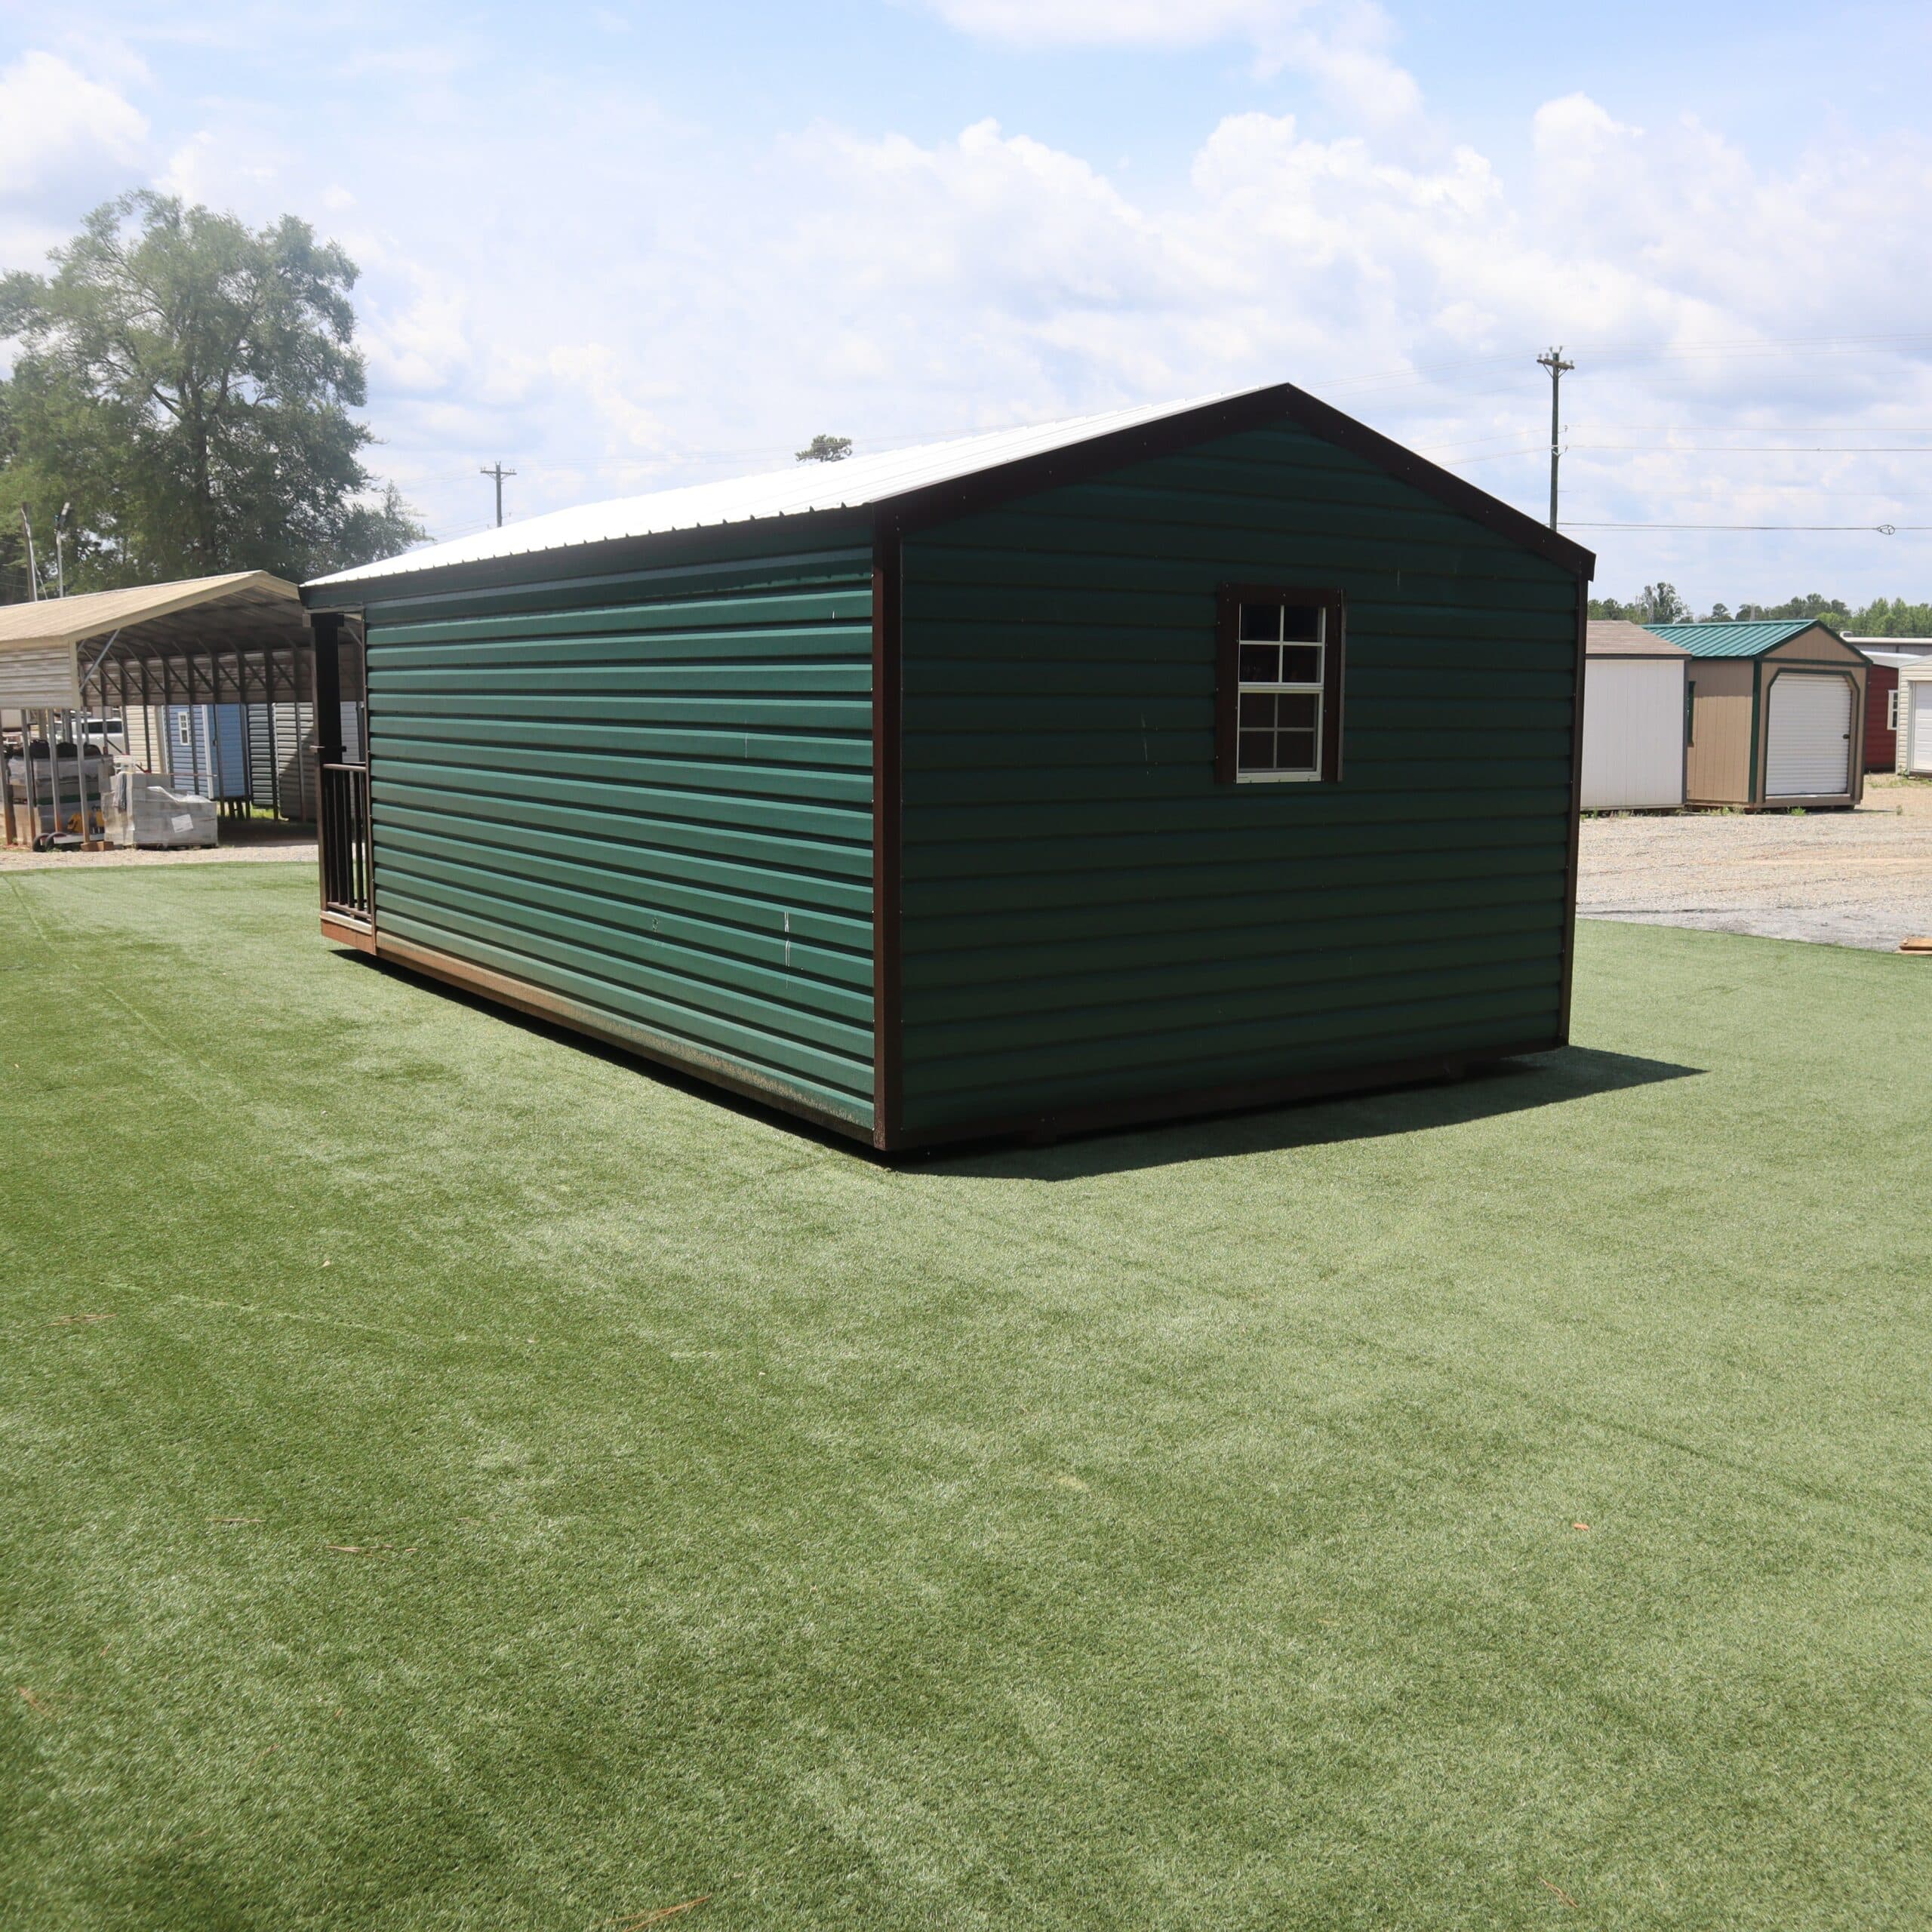 CLEARANCE*** 12x24 UTILITY STORAGE BUILDING PORTABLE SHED